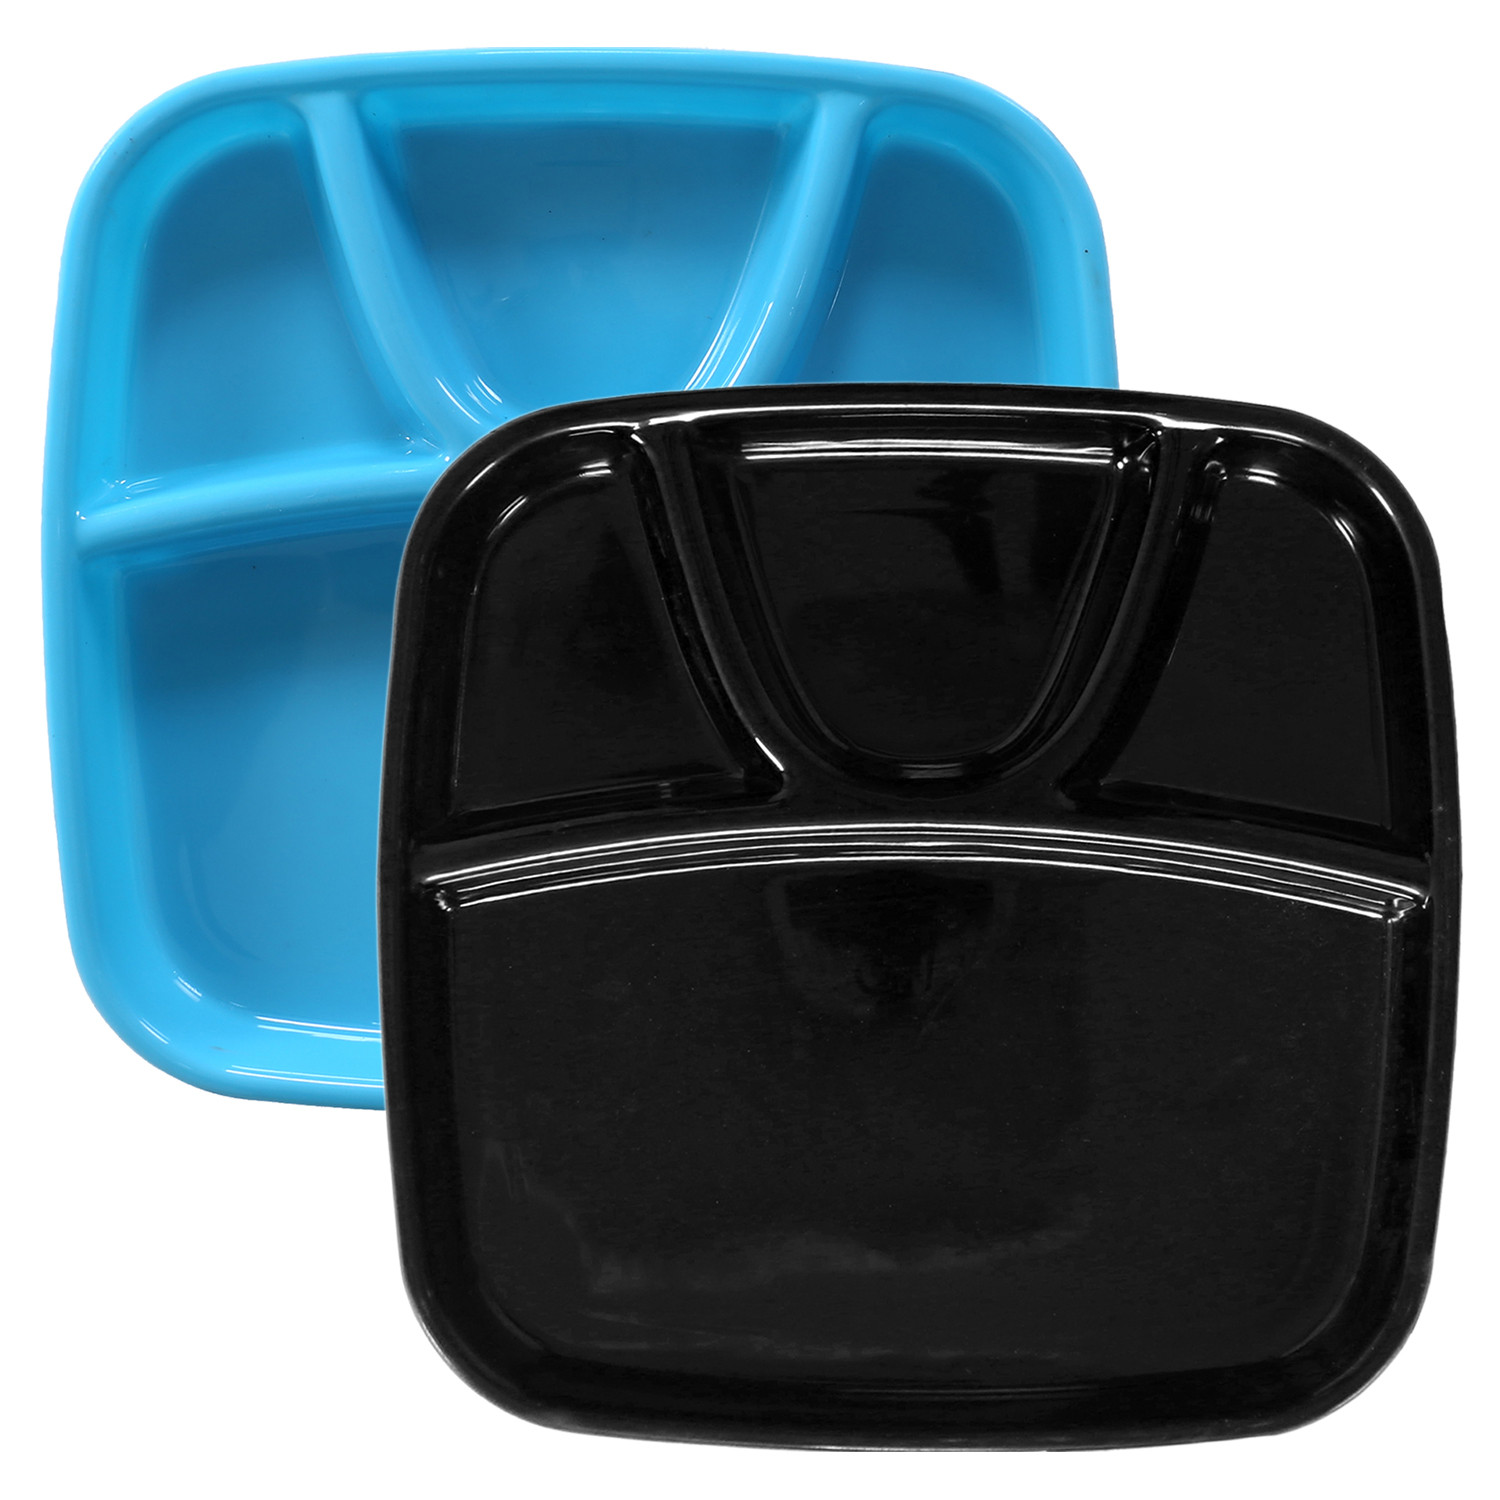 Kuber Industries Serving Plate|Plate Set For Dinner|Unbreakable Plastic Plates|Microwave Safe Plates|Food Organizer With 4 Partitions|(Sky Blue & Black)